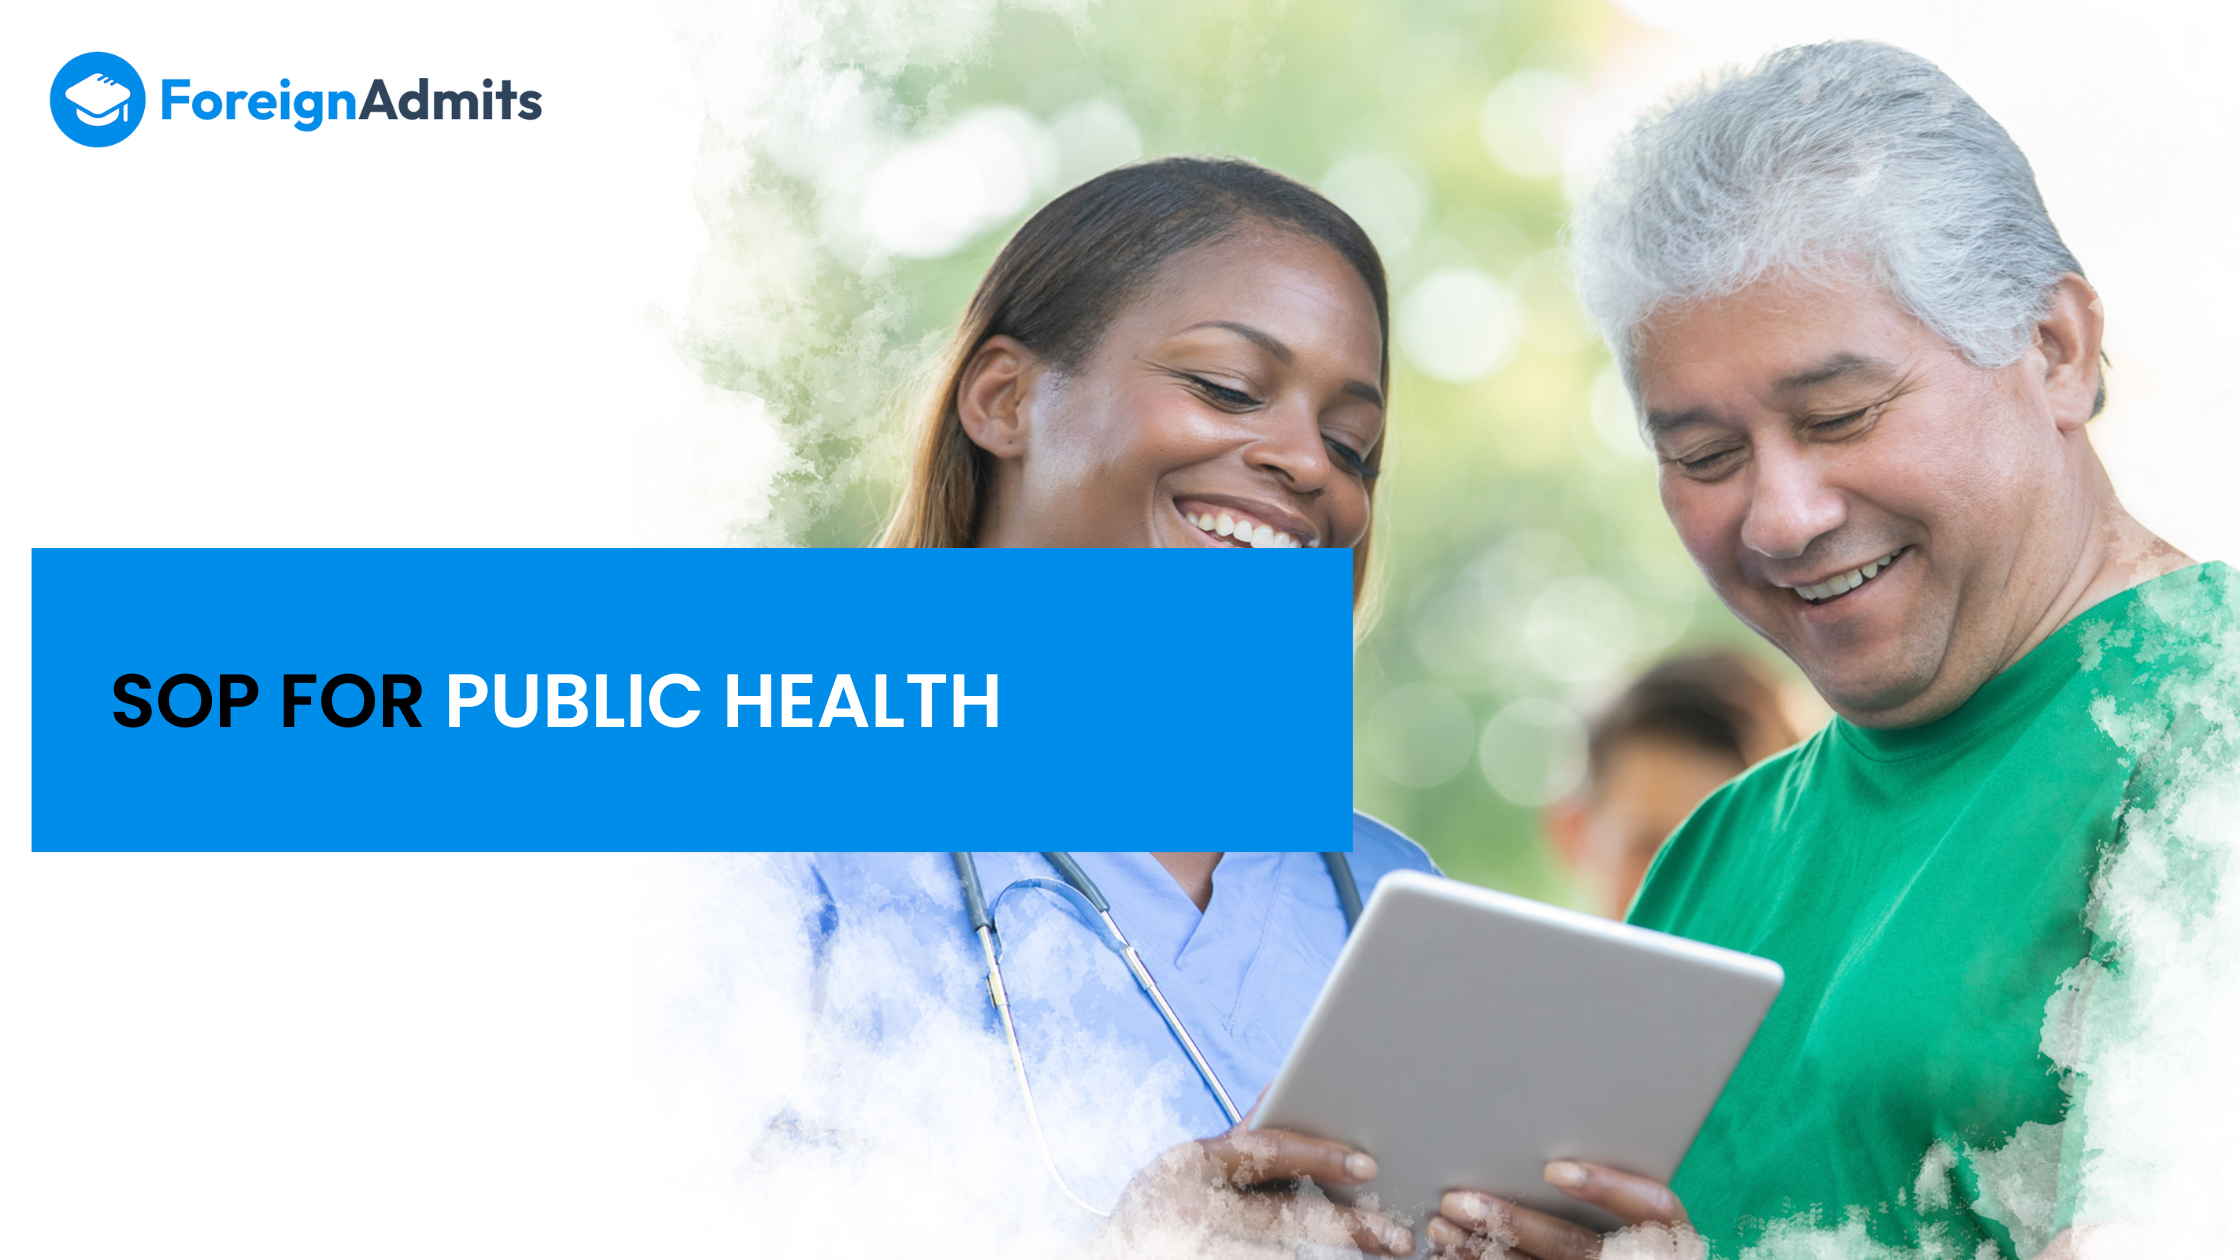 SOP FOR PUBLIC HEALTH: A Complete Guide